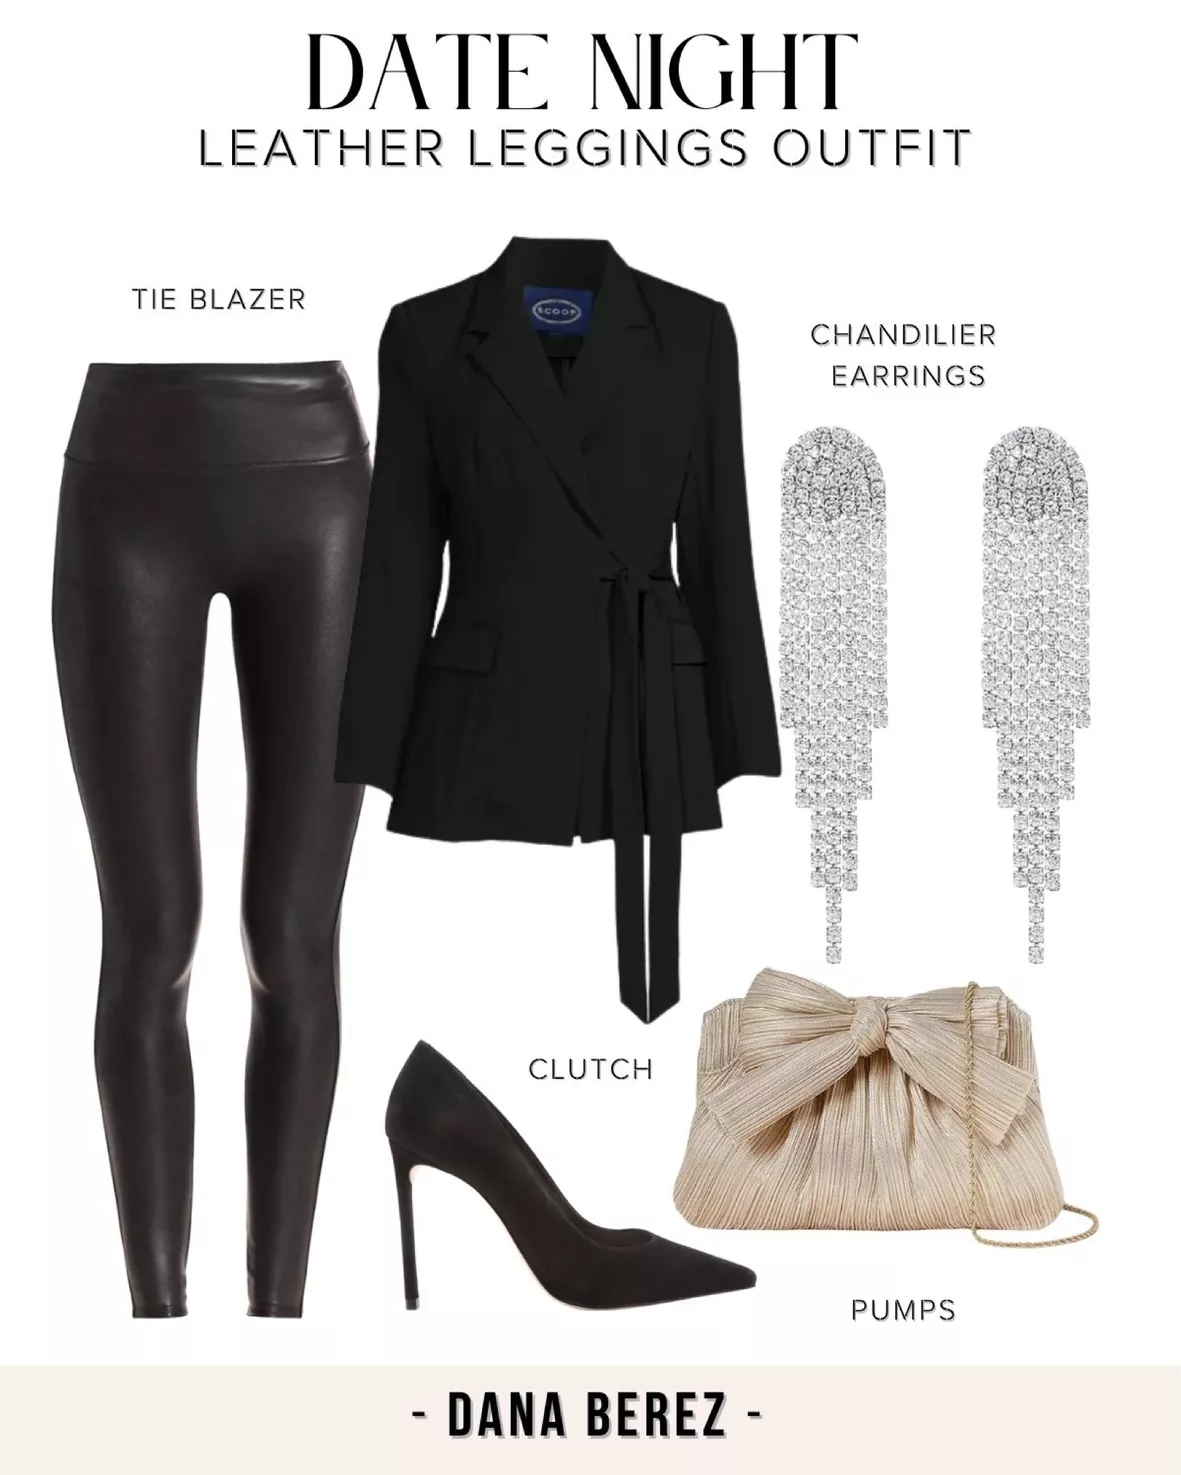 Essentiel Encounter Faux Leather Pants – Gallery Couture